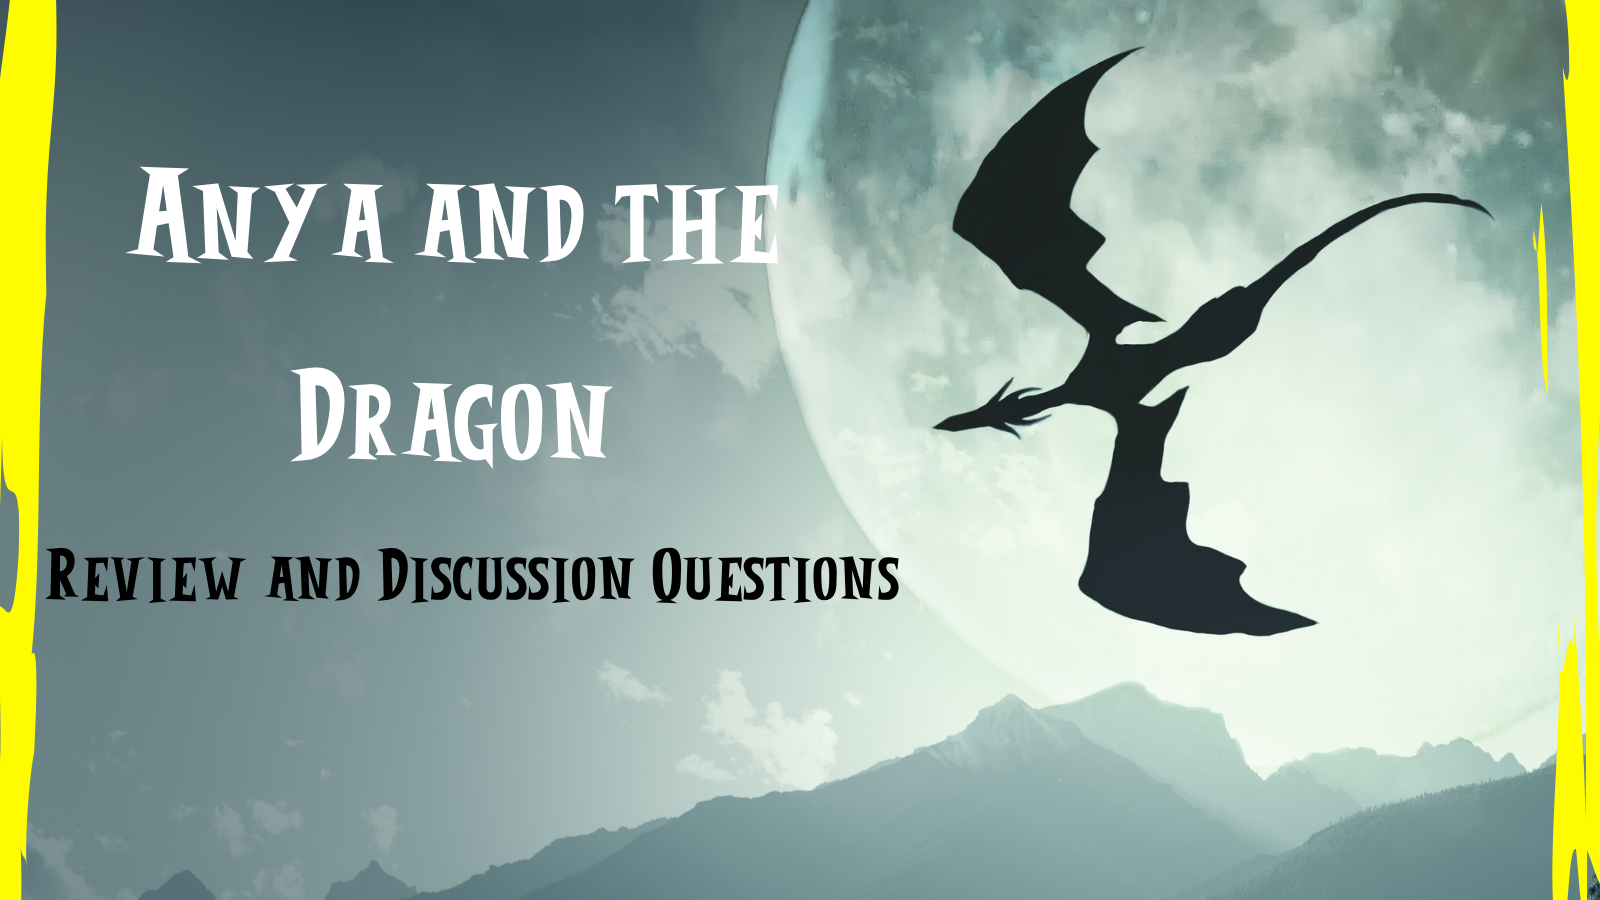 Anya and the Dragon review